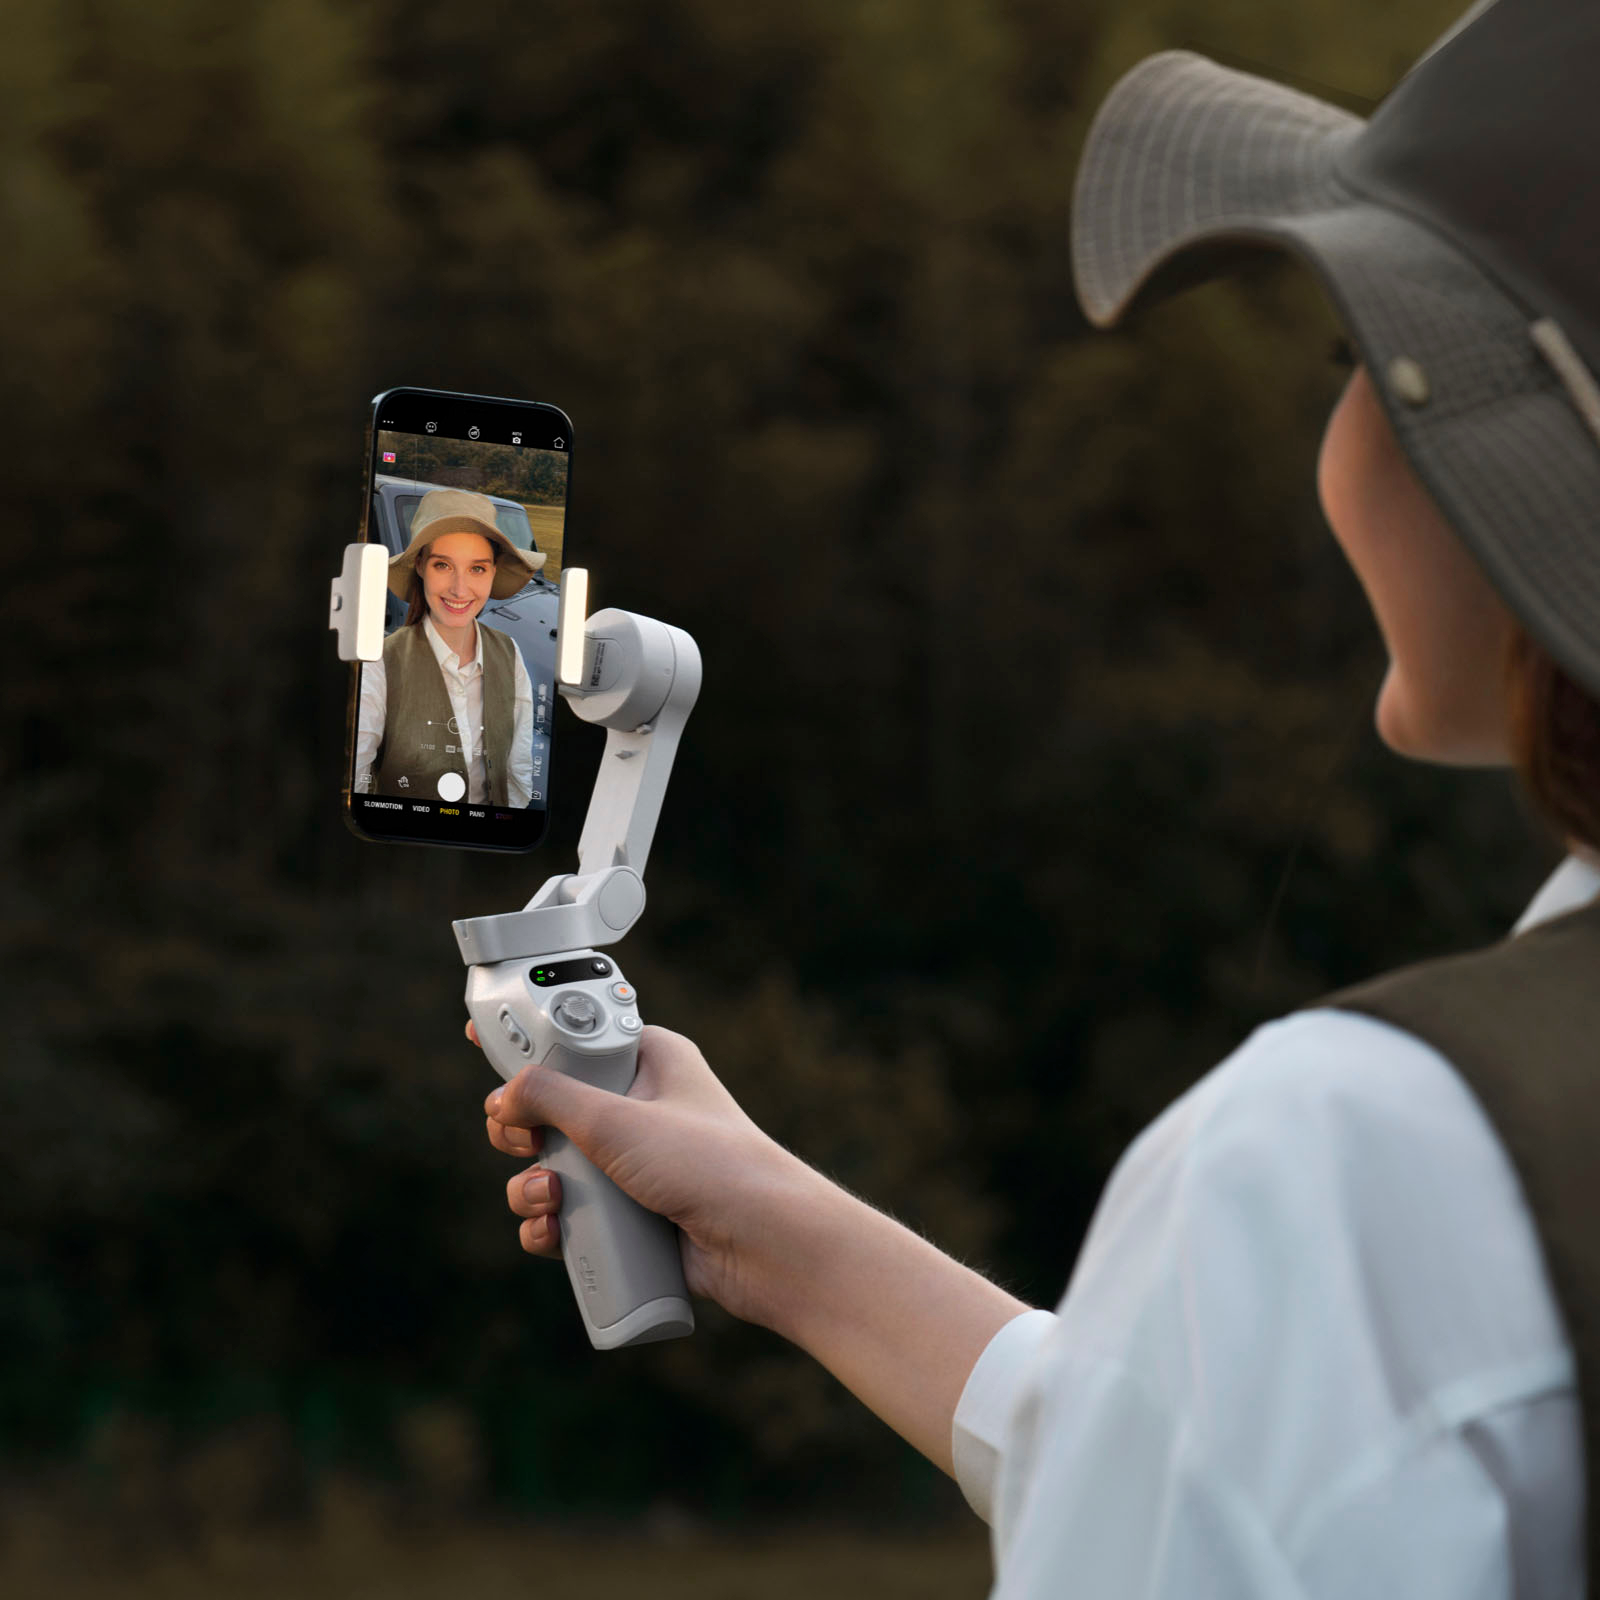 DJI Osmo Mobile SE Smartphone 3-Axis Gimbal Stabilizer CP.OS